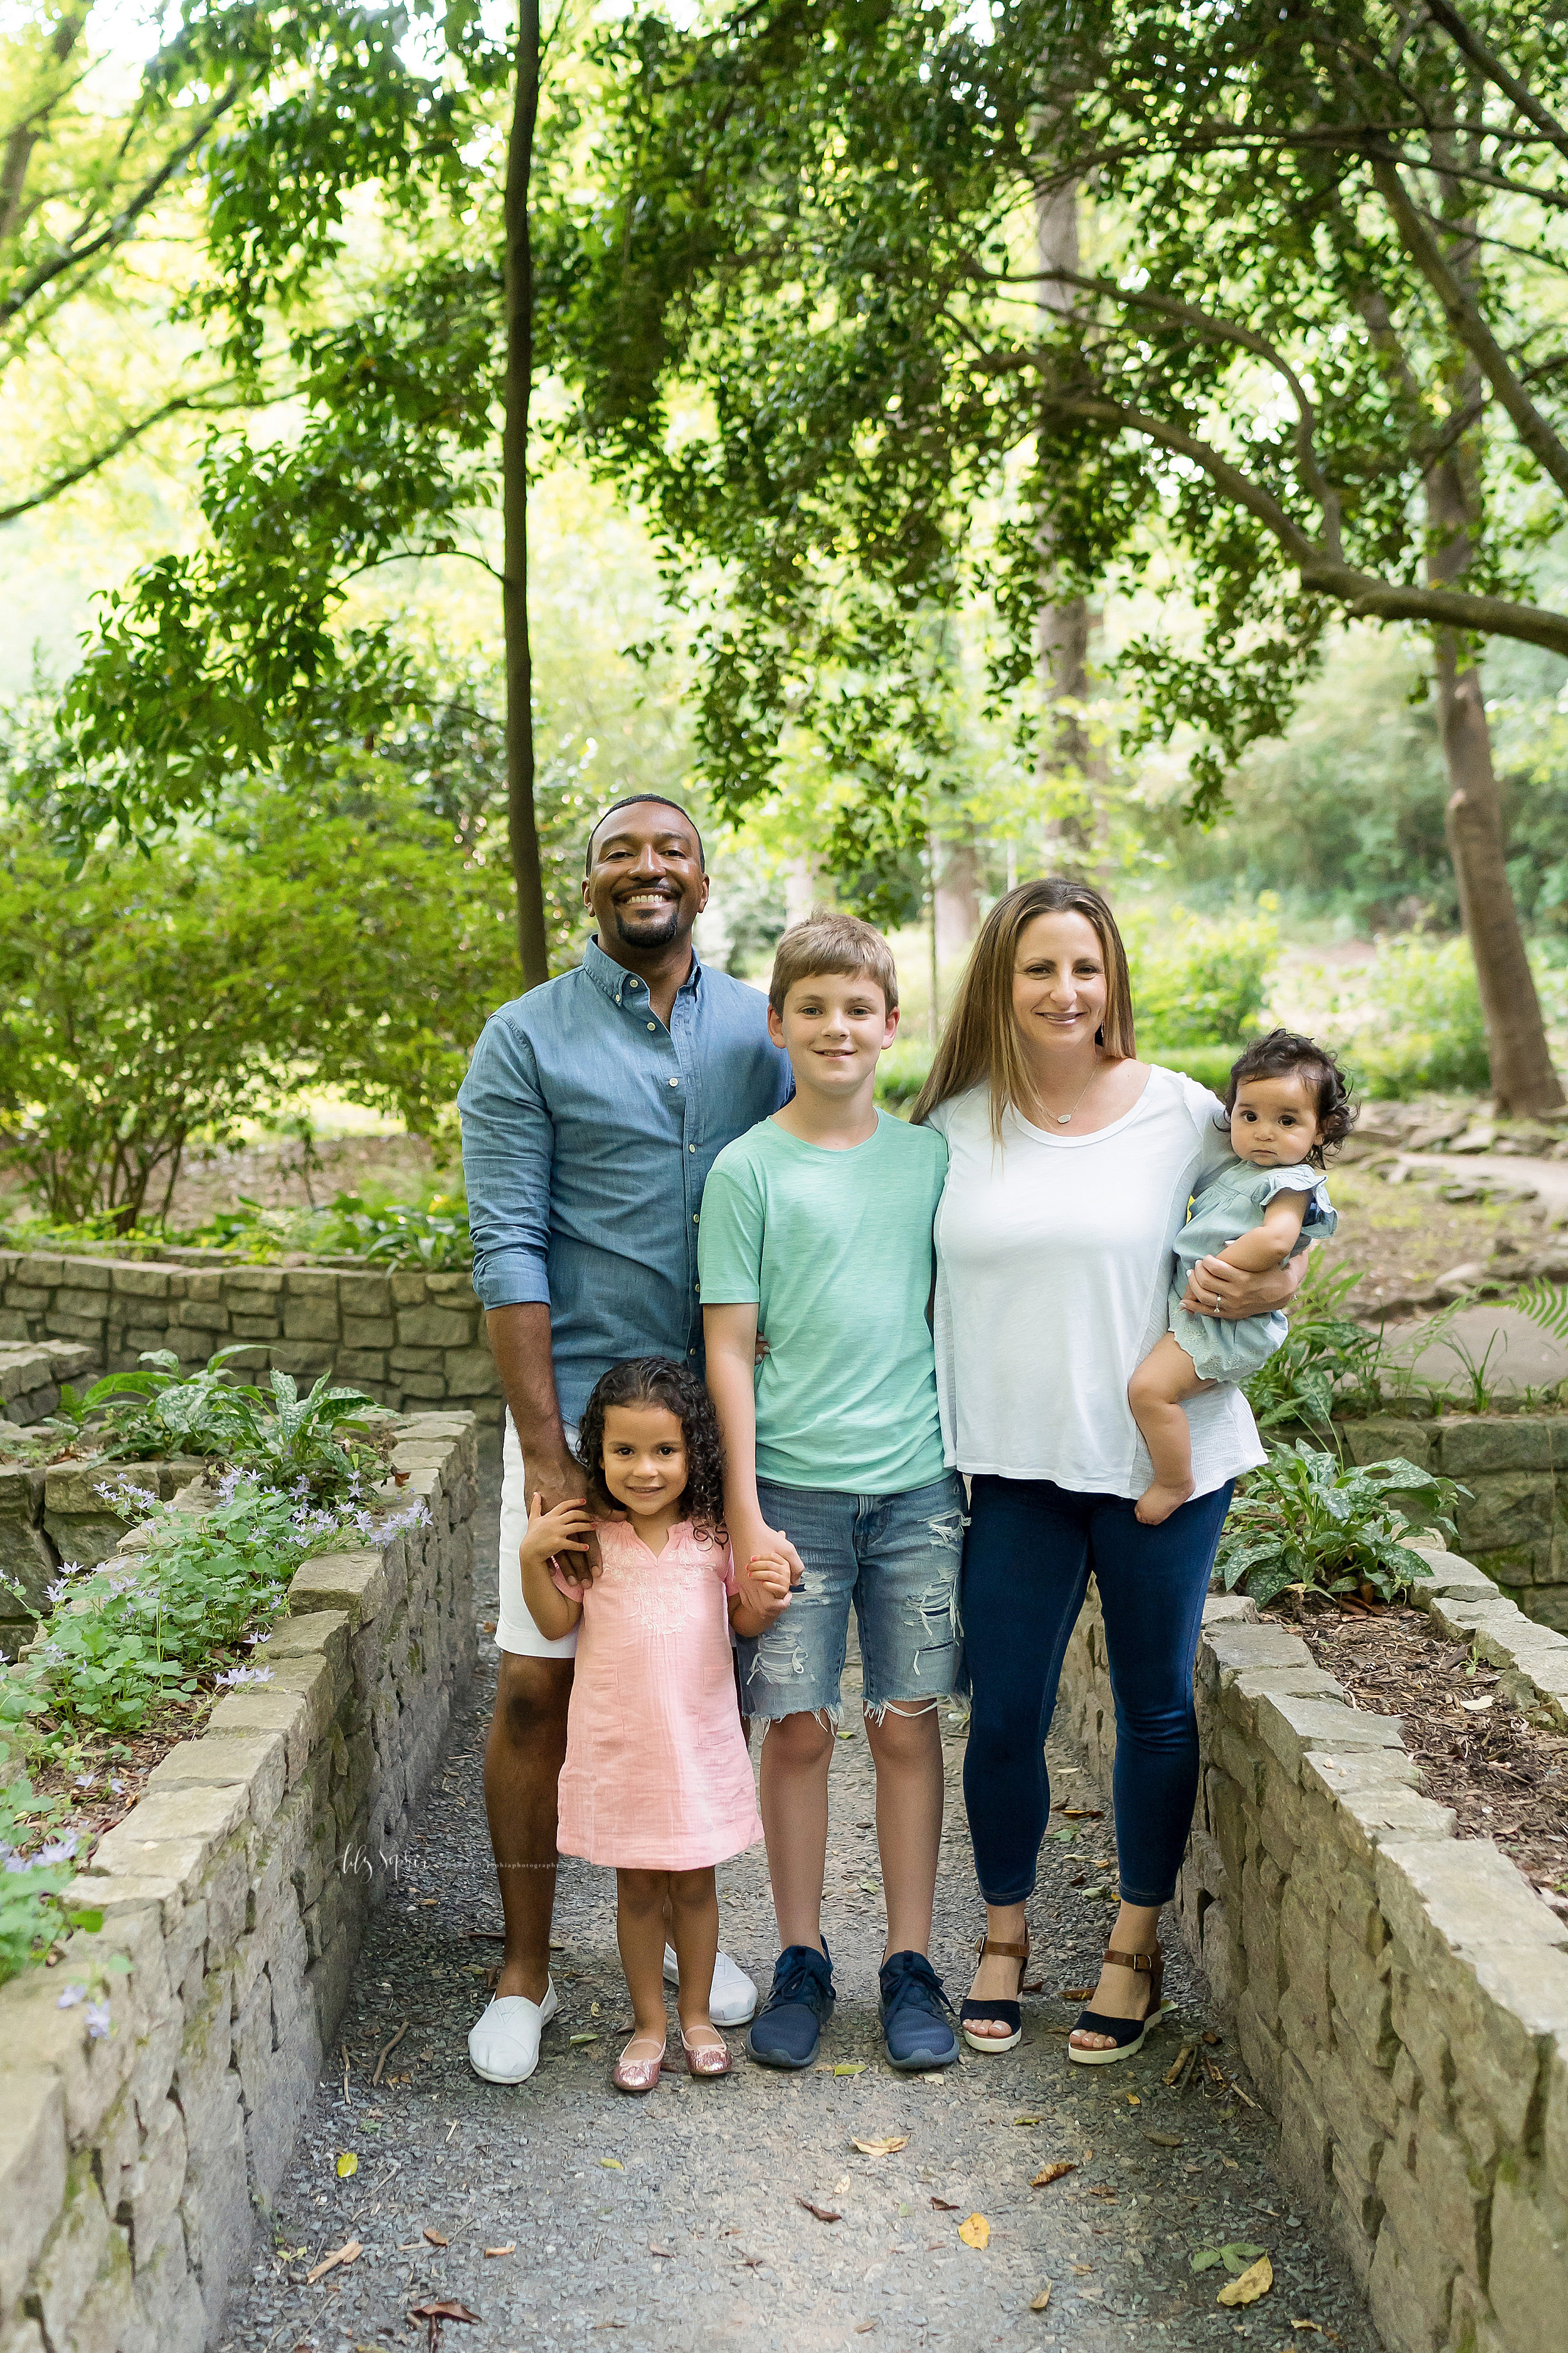  Family photo session in an Atlanta garden with a happy family of five. The mom and son are in the center of the photo as they stand next to one another. Dad is standing behind his son and has his right hand on his young daughter’s right shoulder. Th